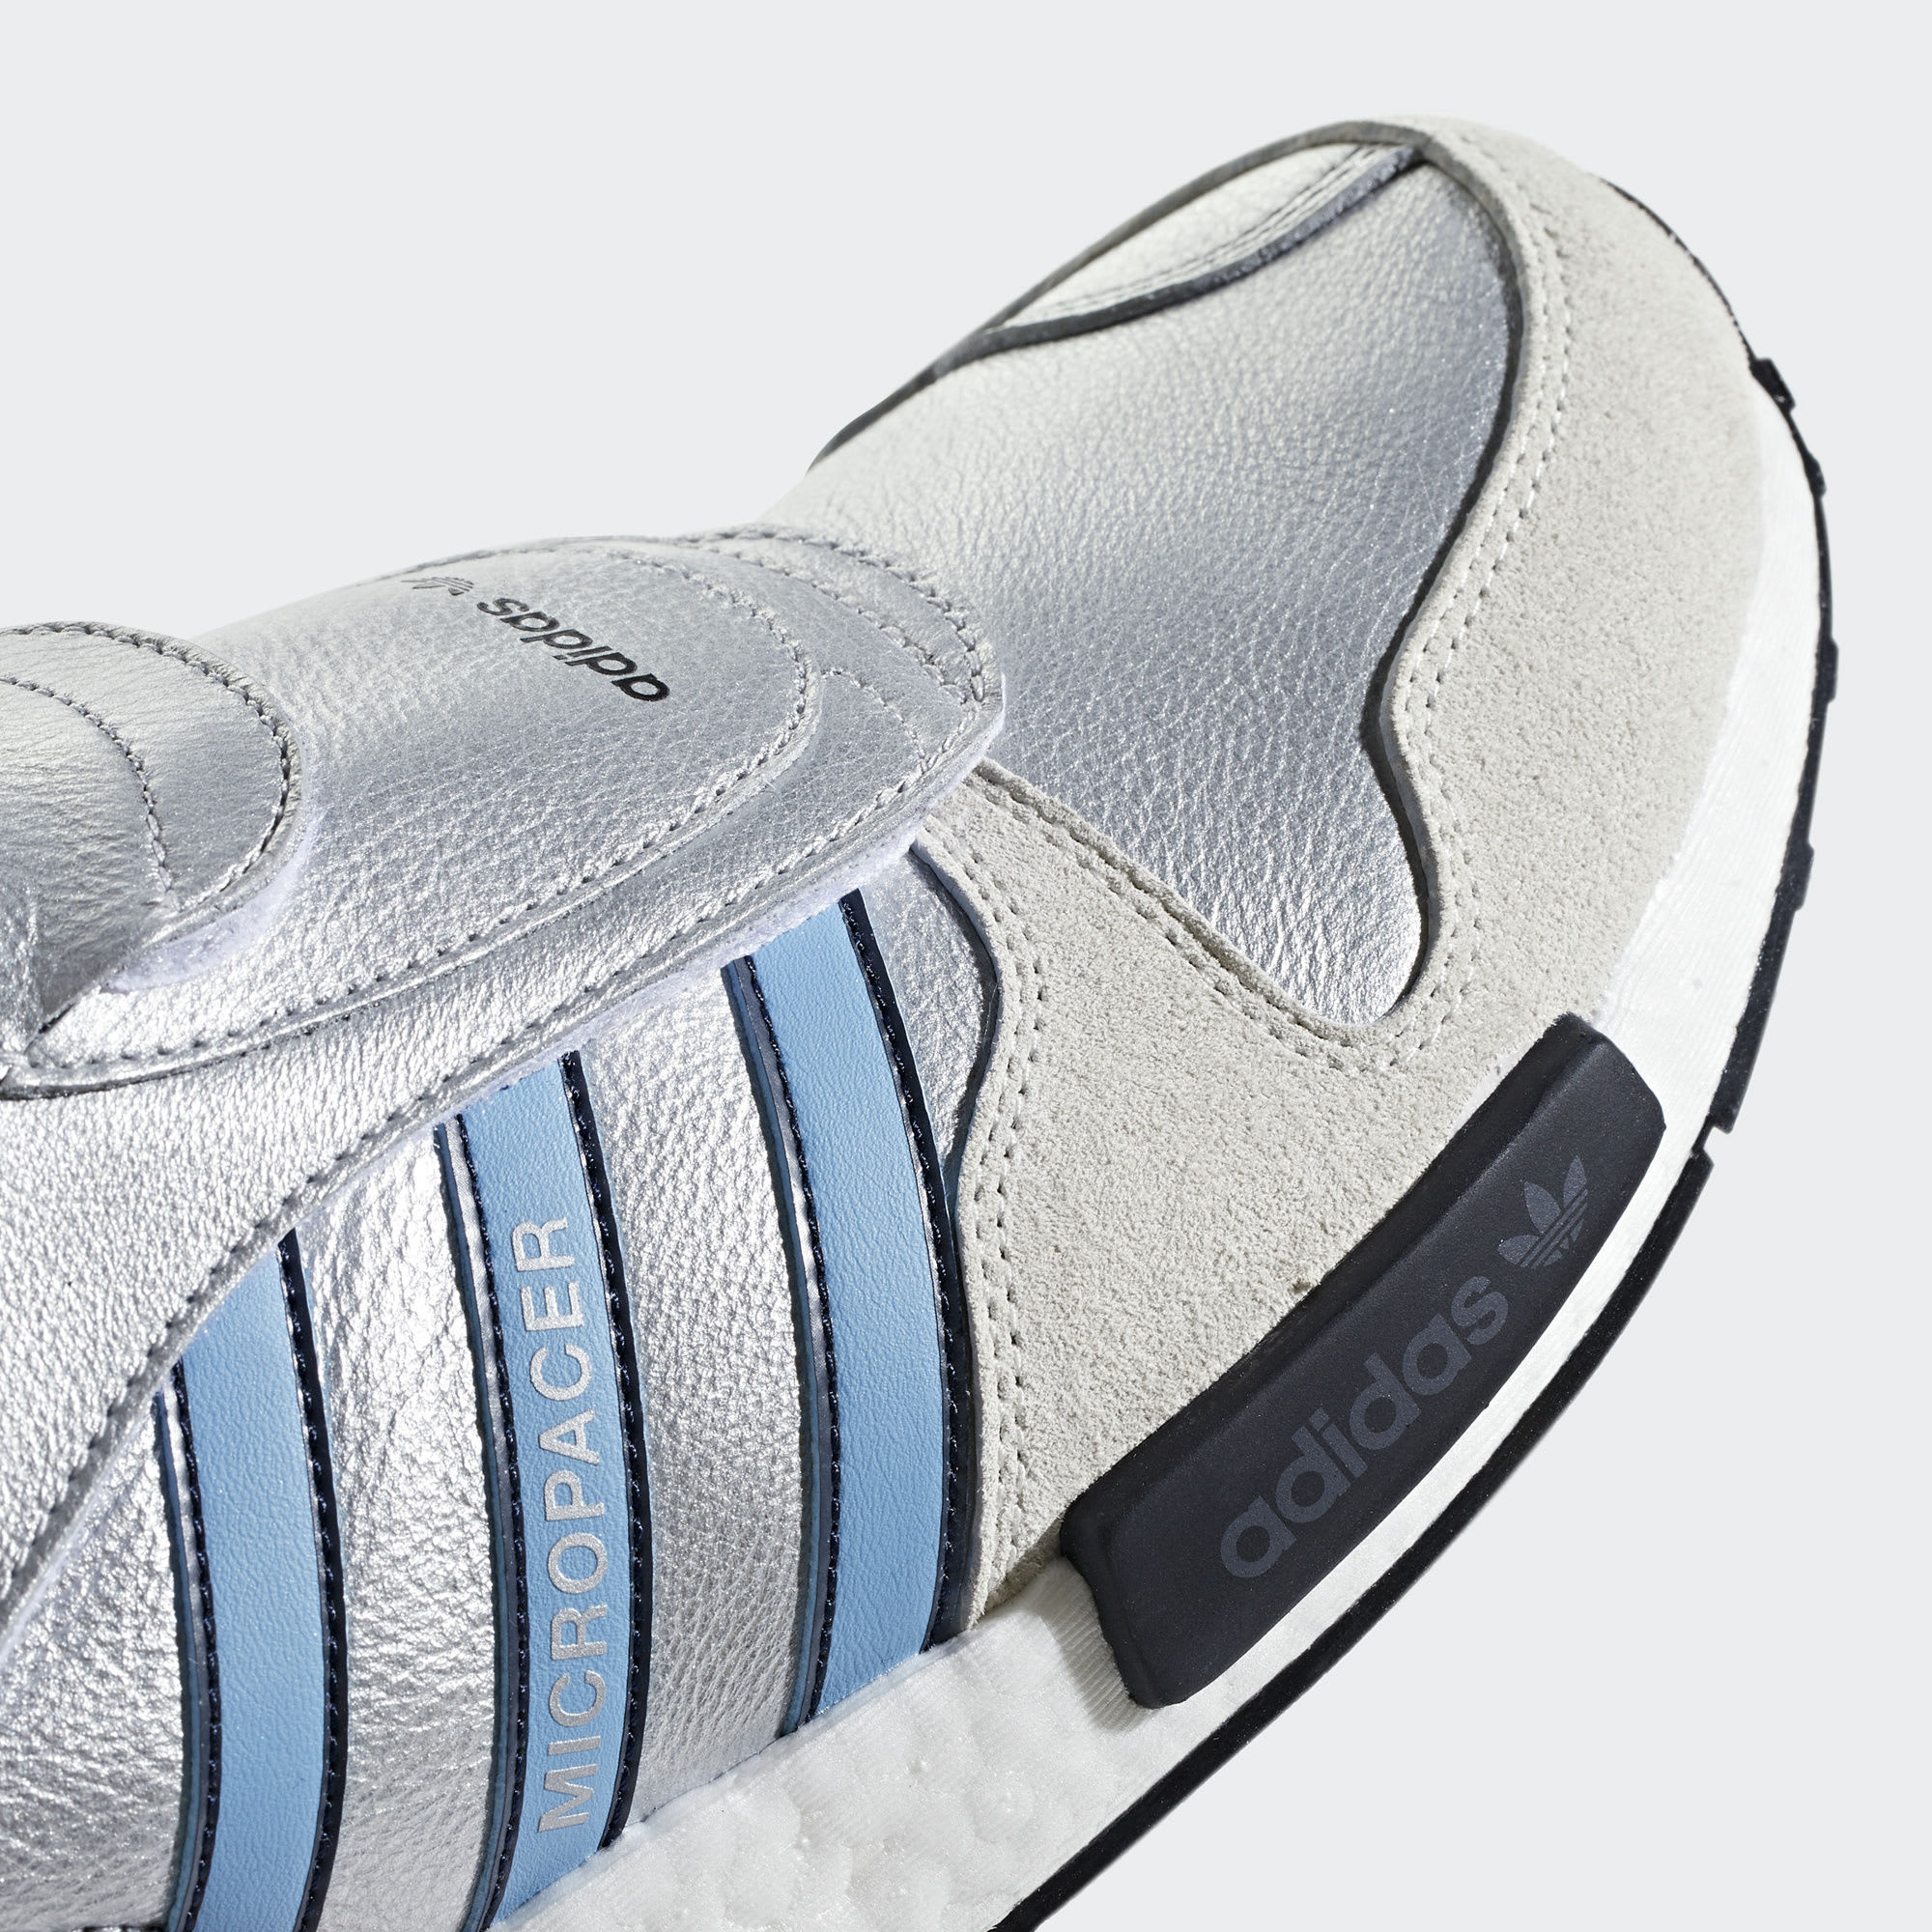 Adidas Micropacer NMD R1 Silver Release Date G26778 Toe